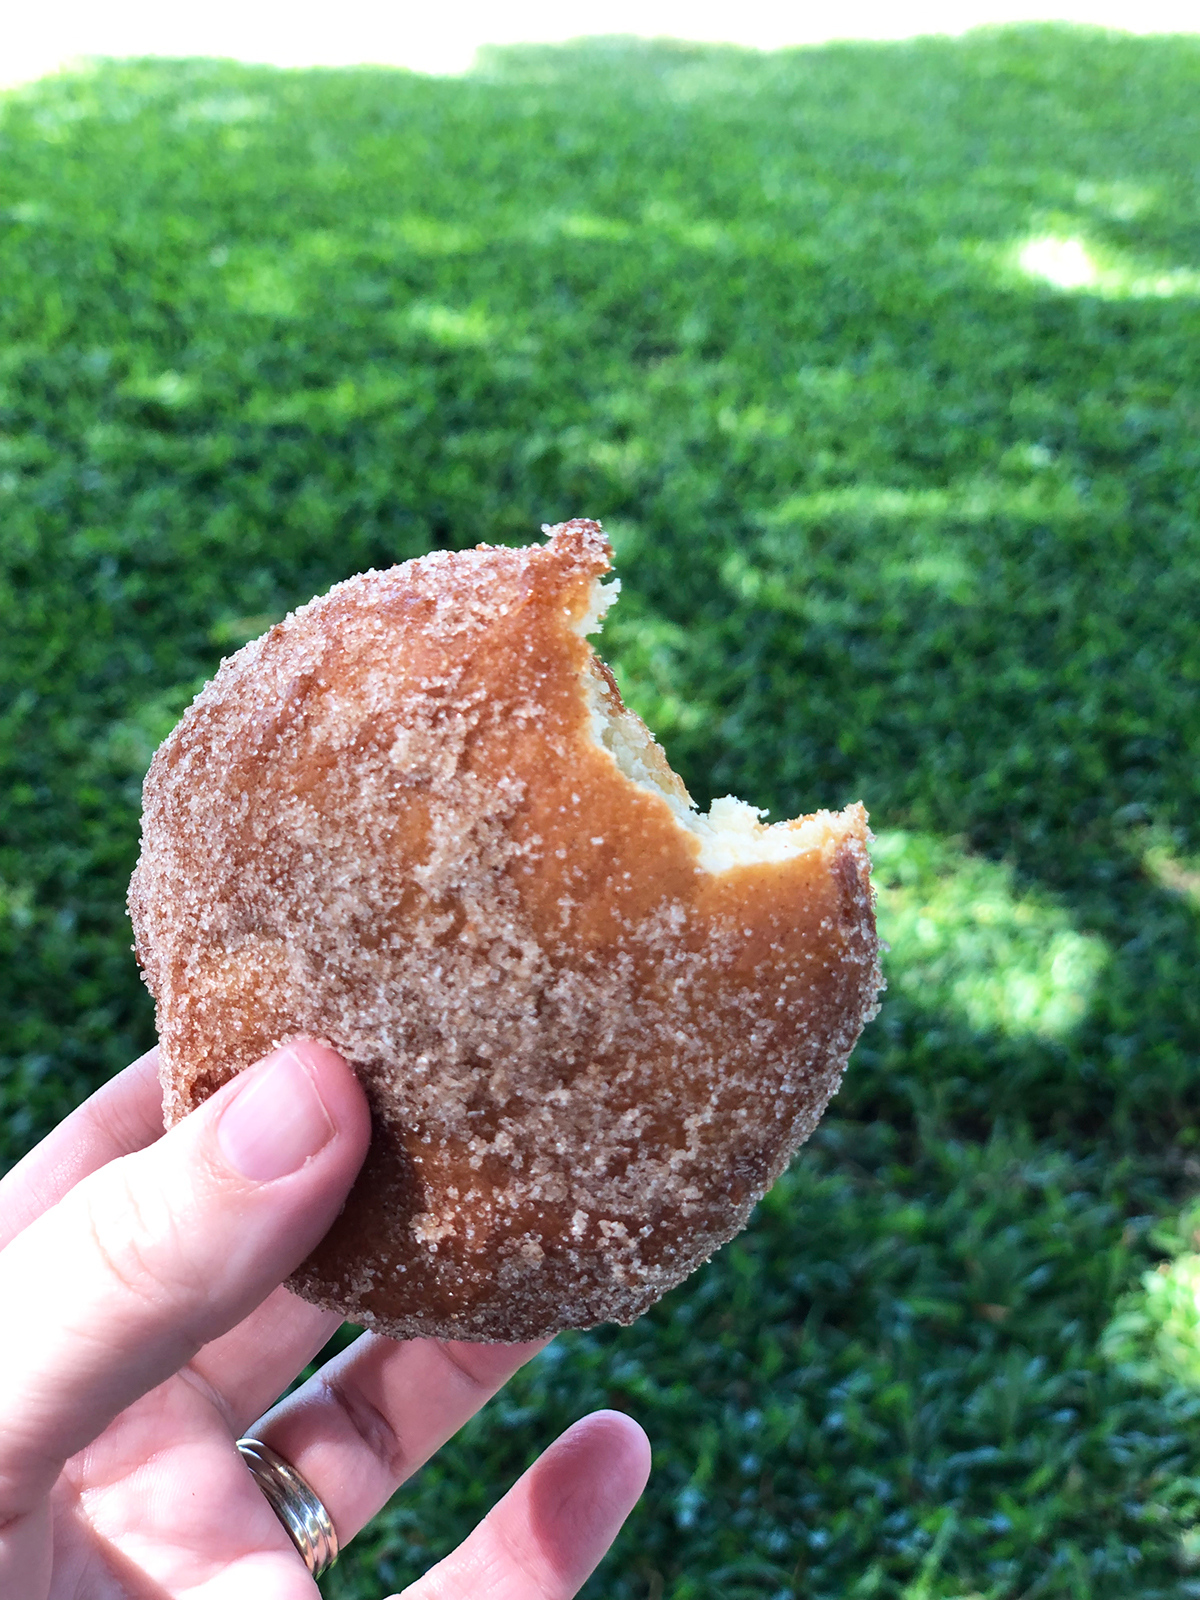 malasada with one bite taken hand holding it grass in background